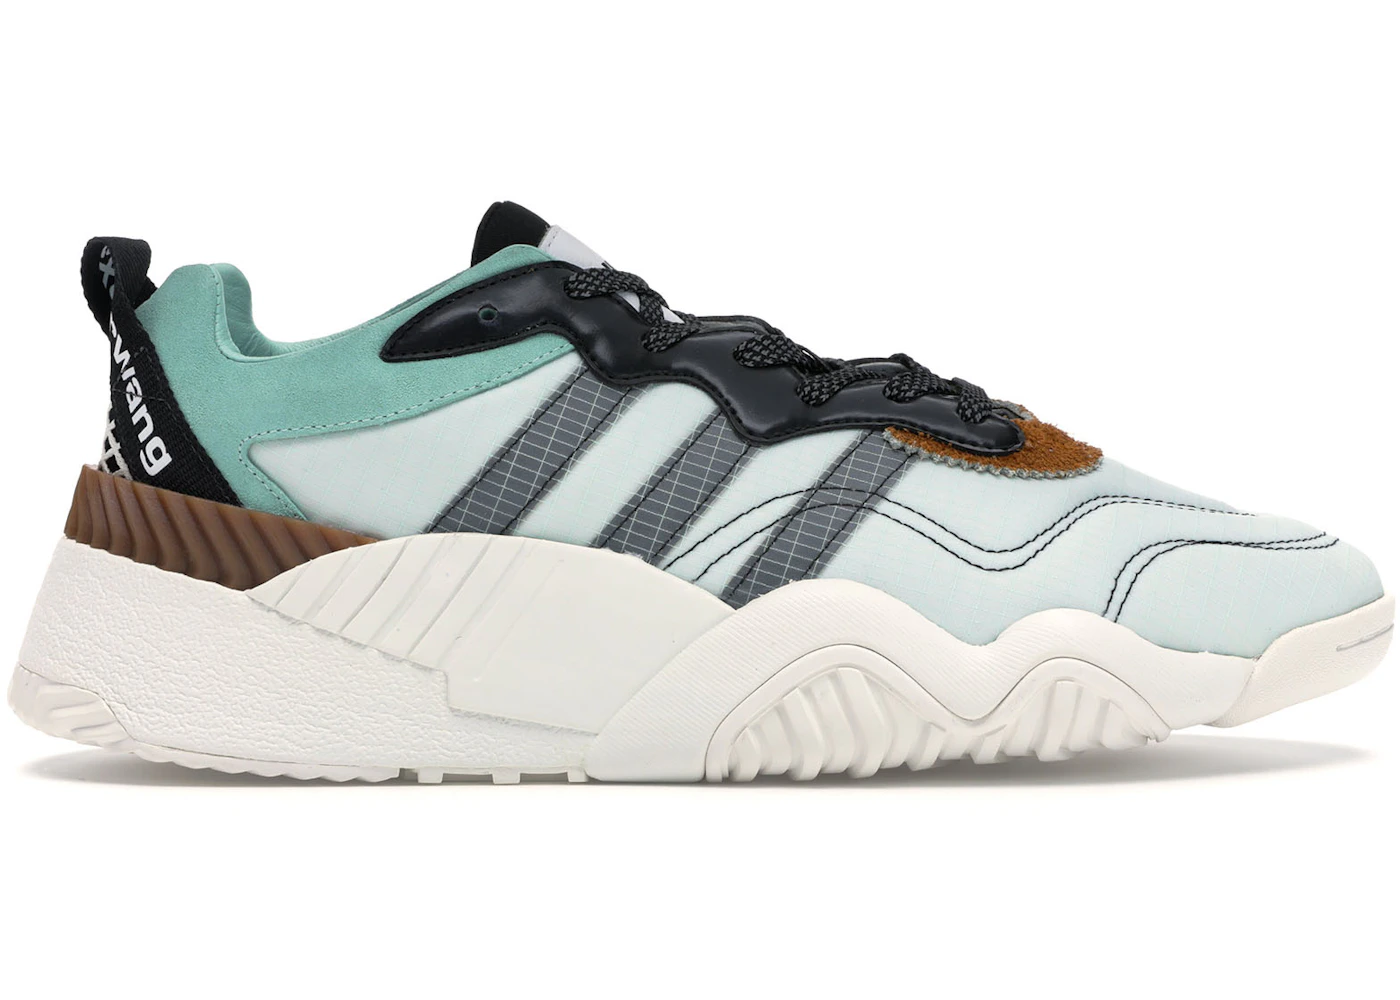 Mejor Continente Conceder adidas AW Turnout Trainer Alexander Wang Clear Mint Core Black Men's -  DB2613 - US